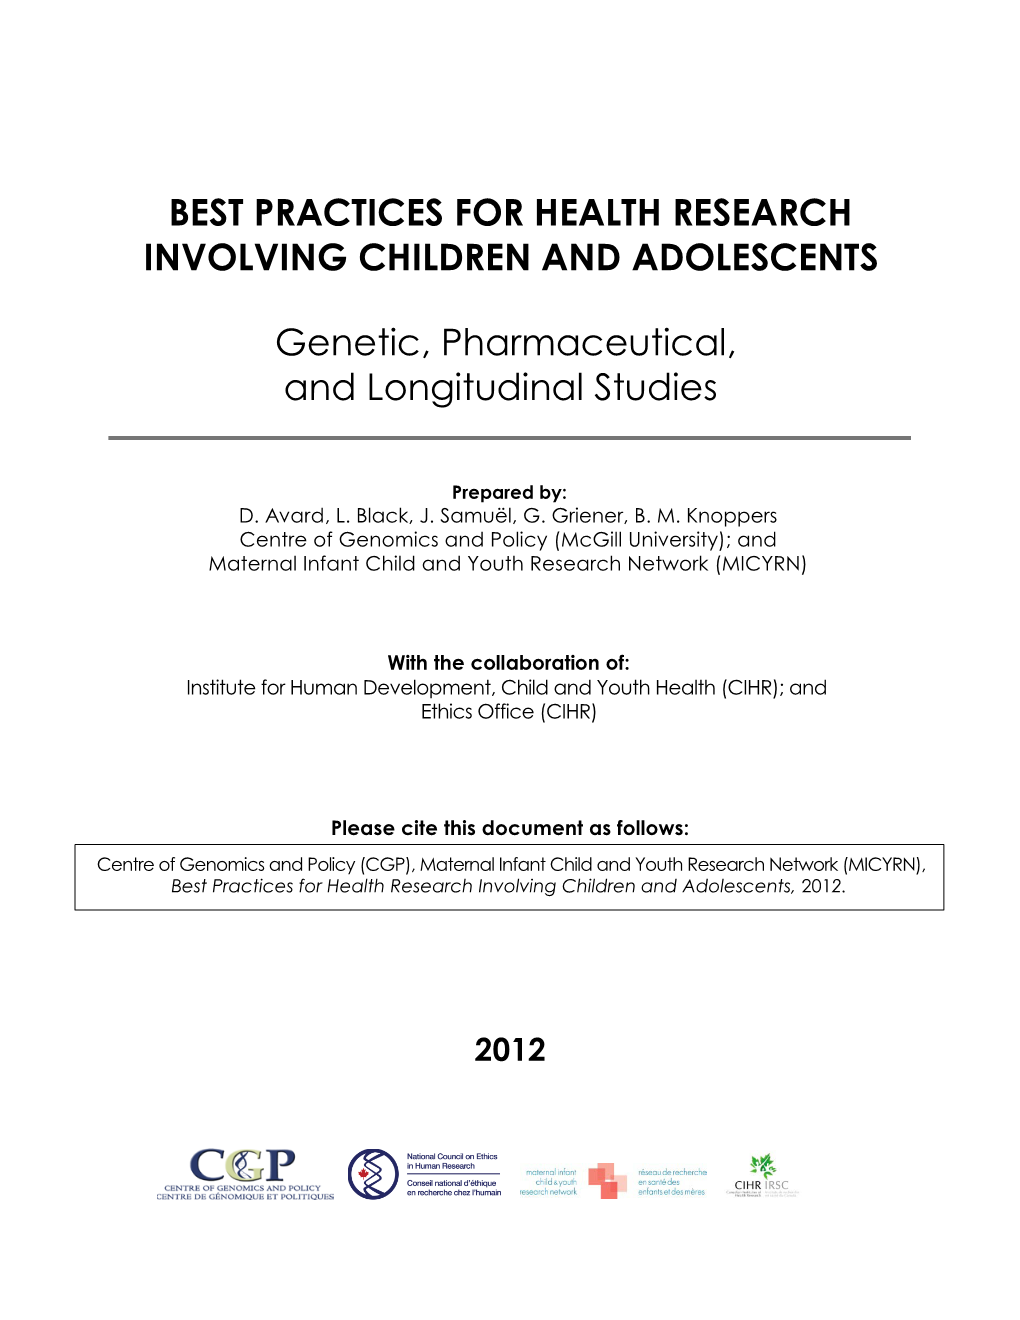 Best Practices for Health Research Involving Children and Adolescents